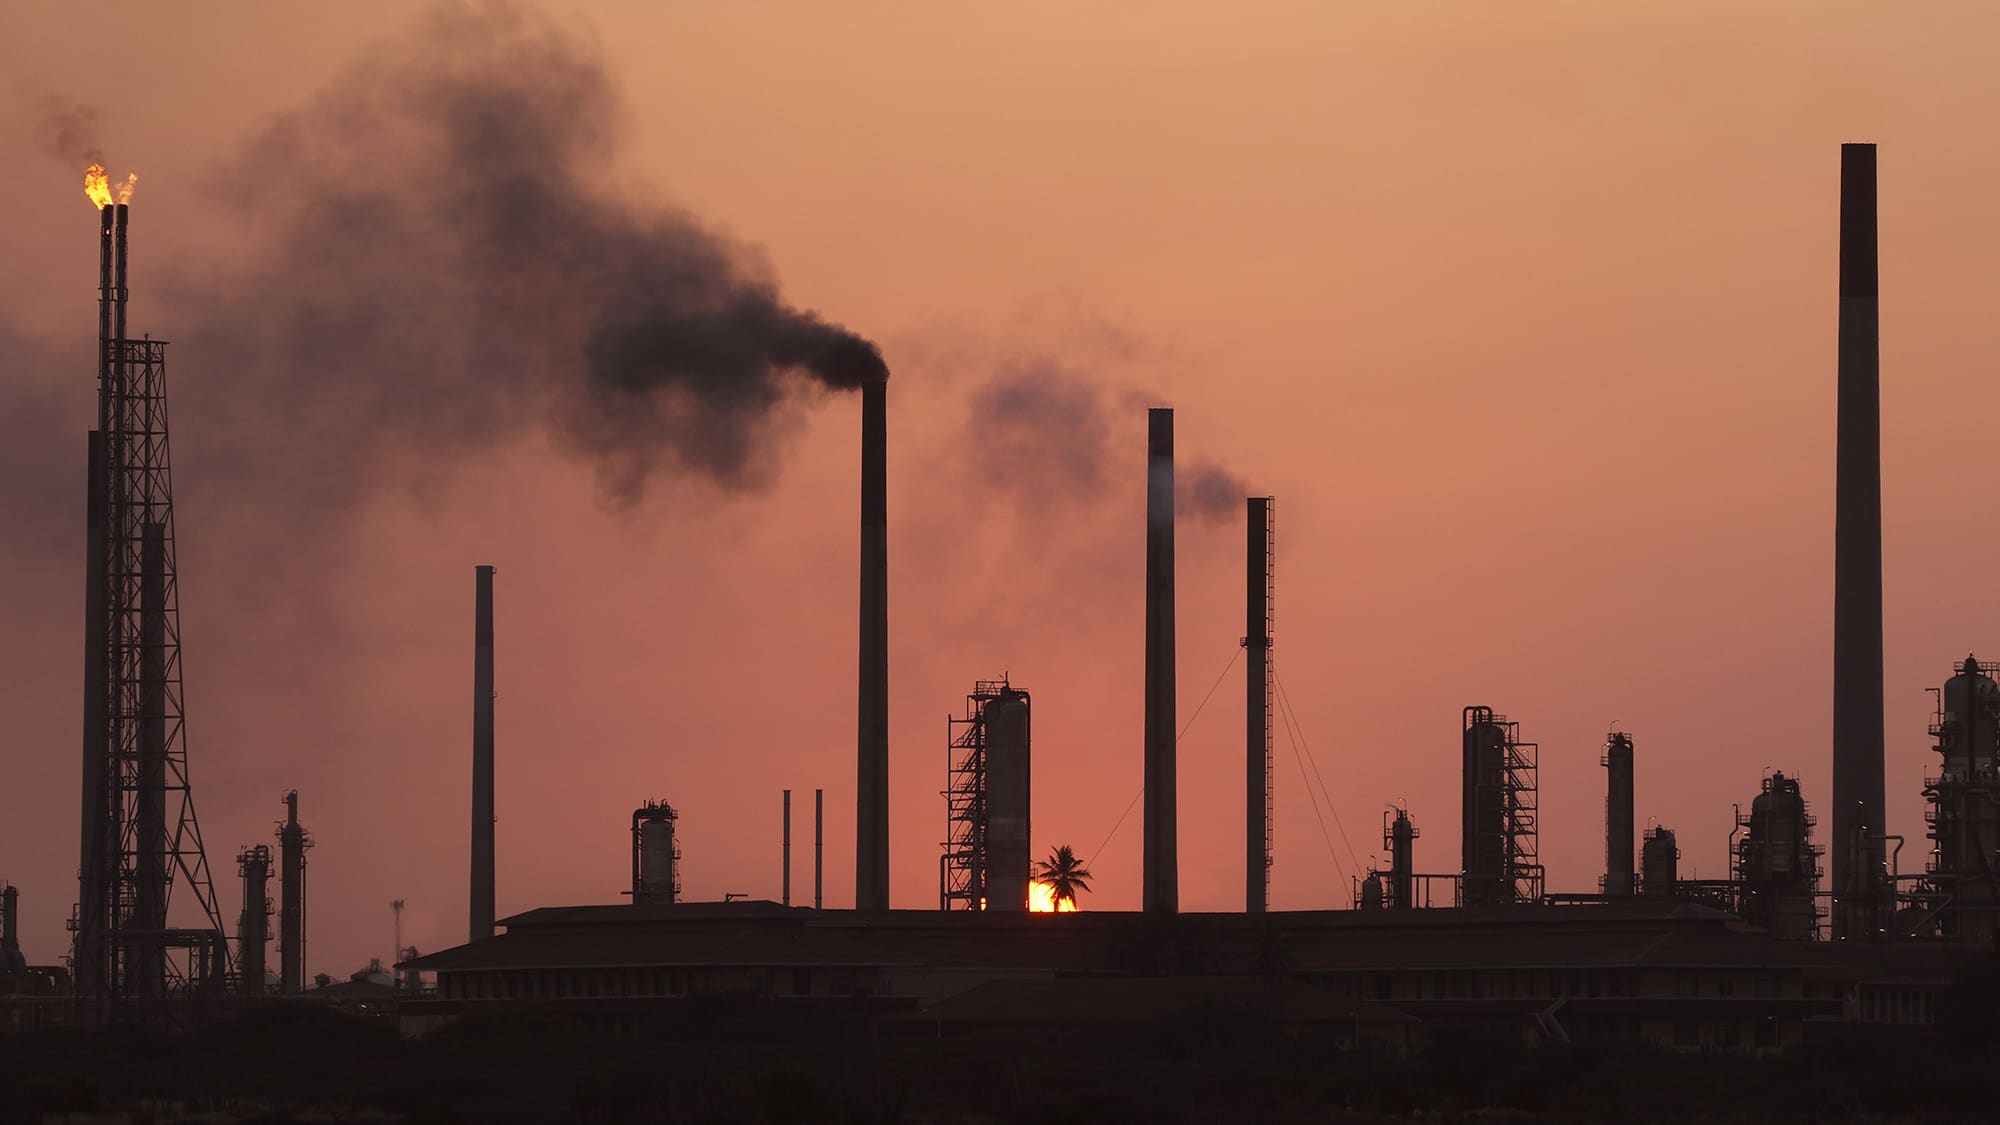 willemstad, curacao, dutch antilles, old oil refinery at dusk, pollution of environment